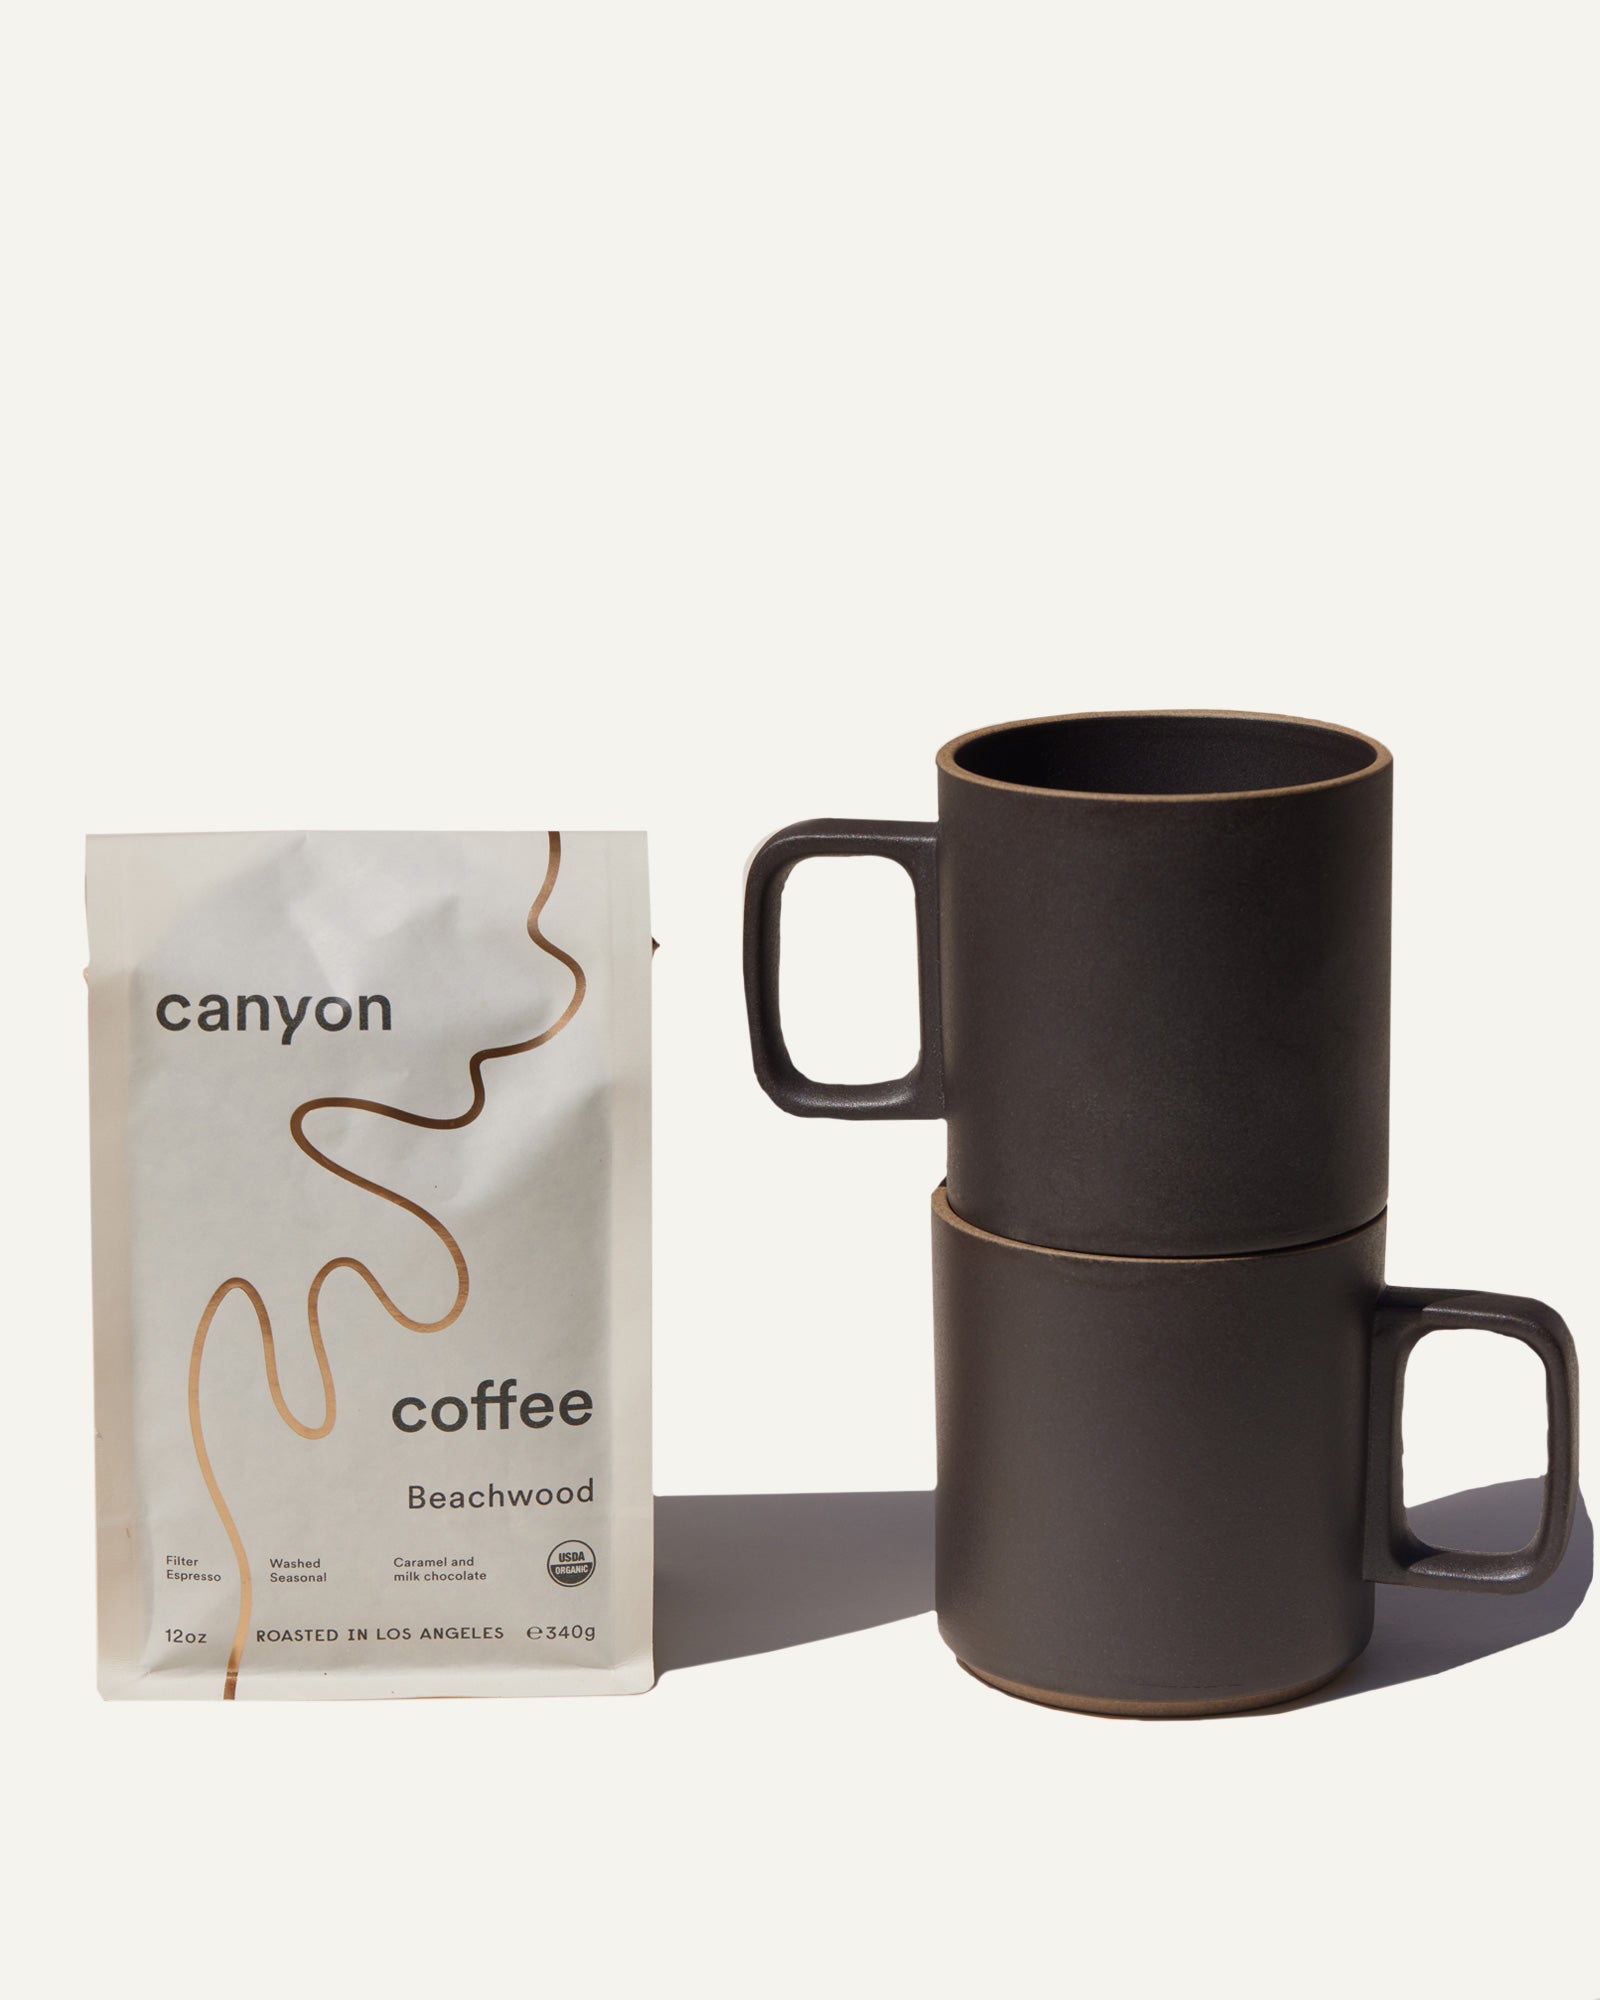 The Host Gift Bundle by Canyon coffee featuring a pair of tan Hasami mugs and a bag of organic coffee